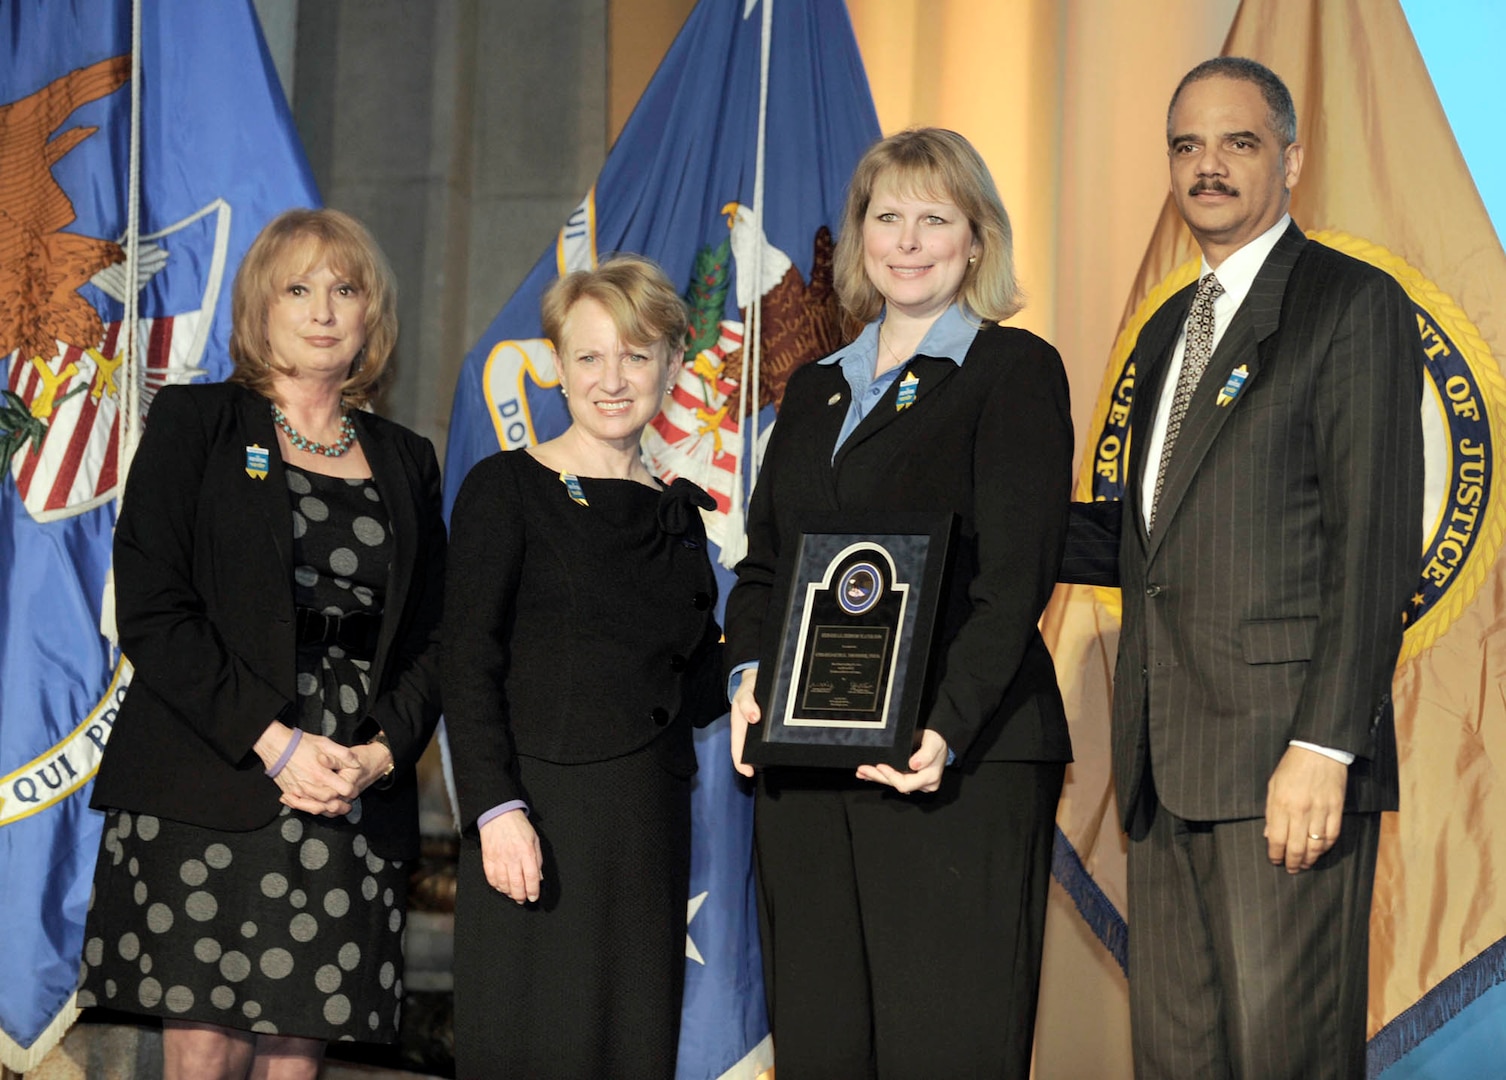 Dr. Charlotte Moerbe (second from right), Joint Base San Antonio sexual assault response coordinator, receives a Federal Service Award during the National Crime Victims’ Service Awards ceremony April 8 in Washington, D.C. Dr. Moerbe was recognized for her work supporting military members recovering from sexual violence. She is joined by, from left, Joye Frost, Acting Director, Office for Victims of Crime; Laurie Robinson, Assistant Attorney General, Office of Justice Programs; and Attorney General Eric Holder. (Photo by/Scott Ash)